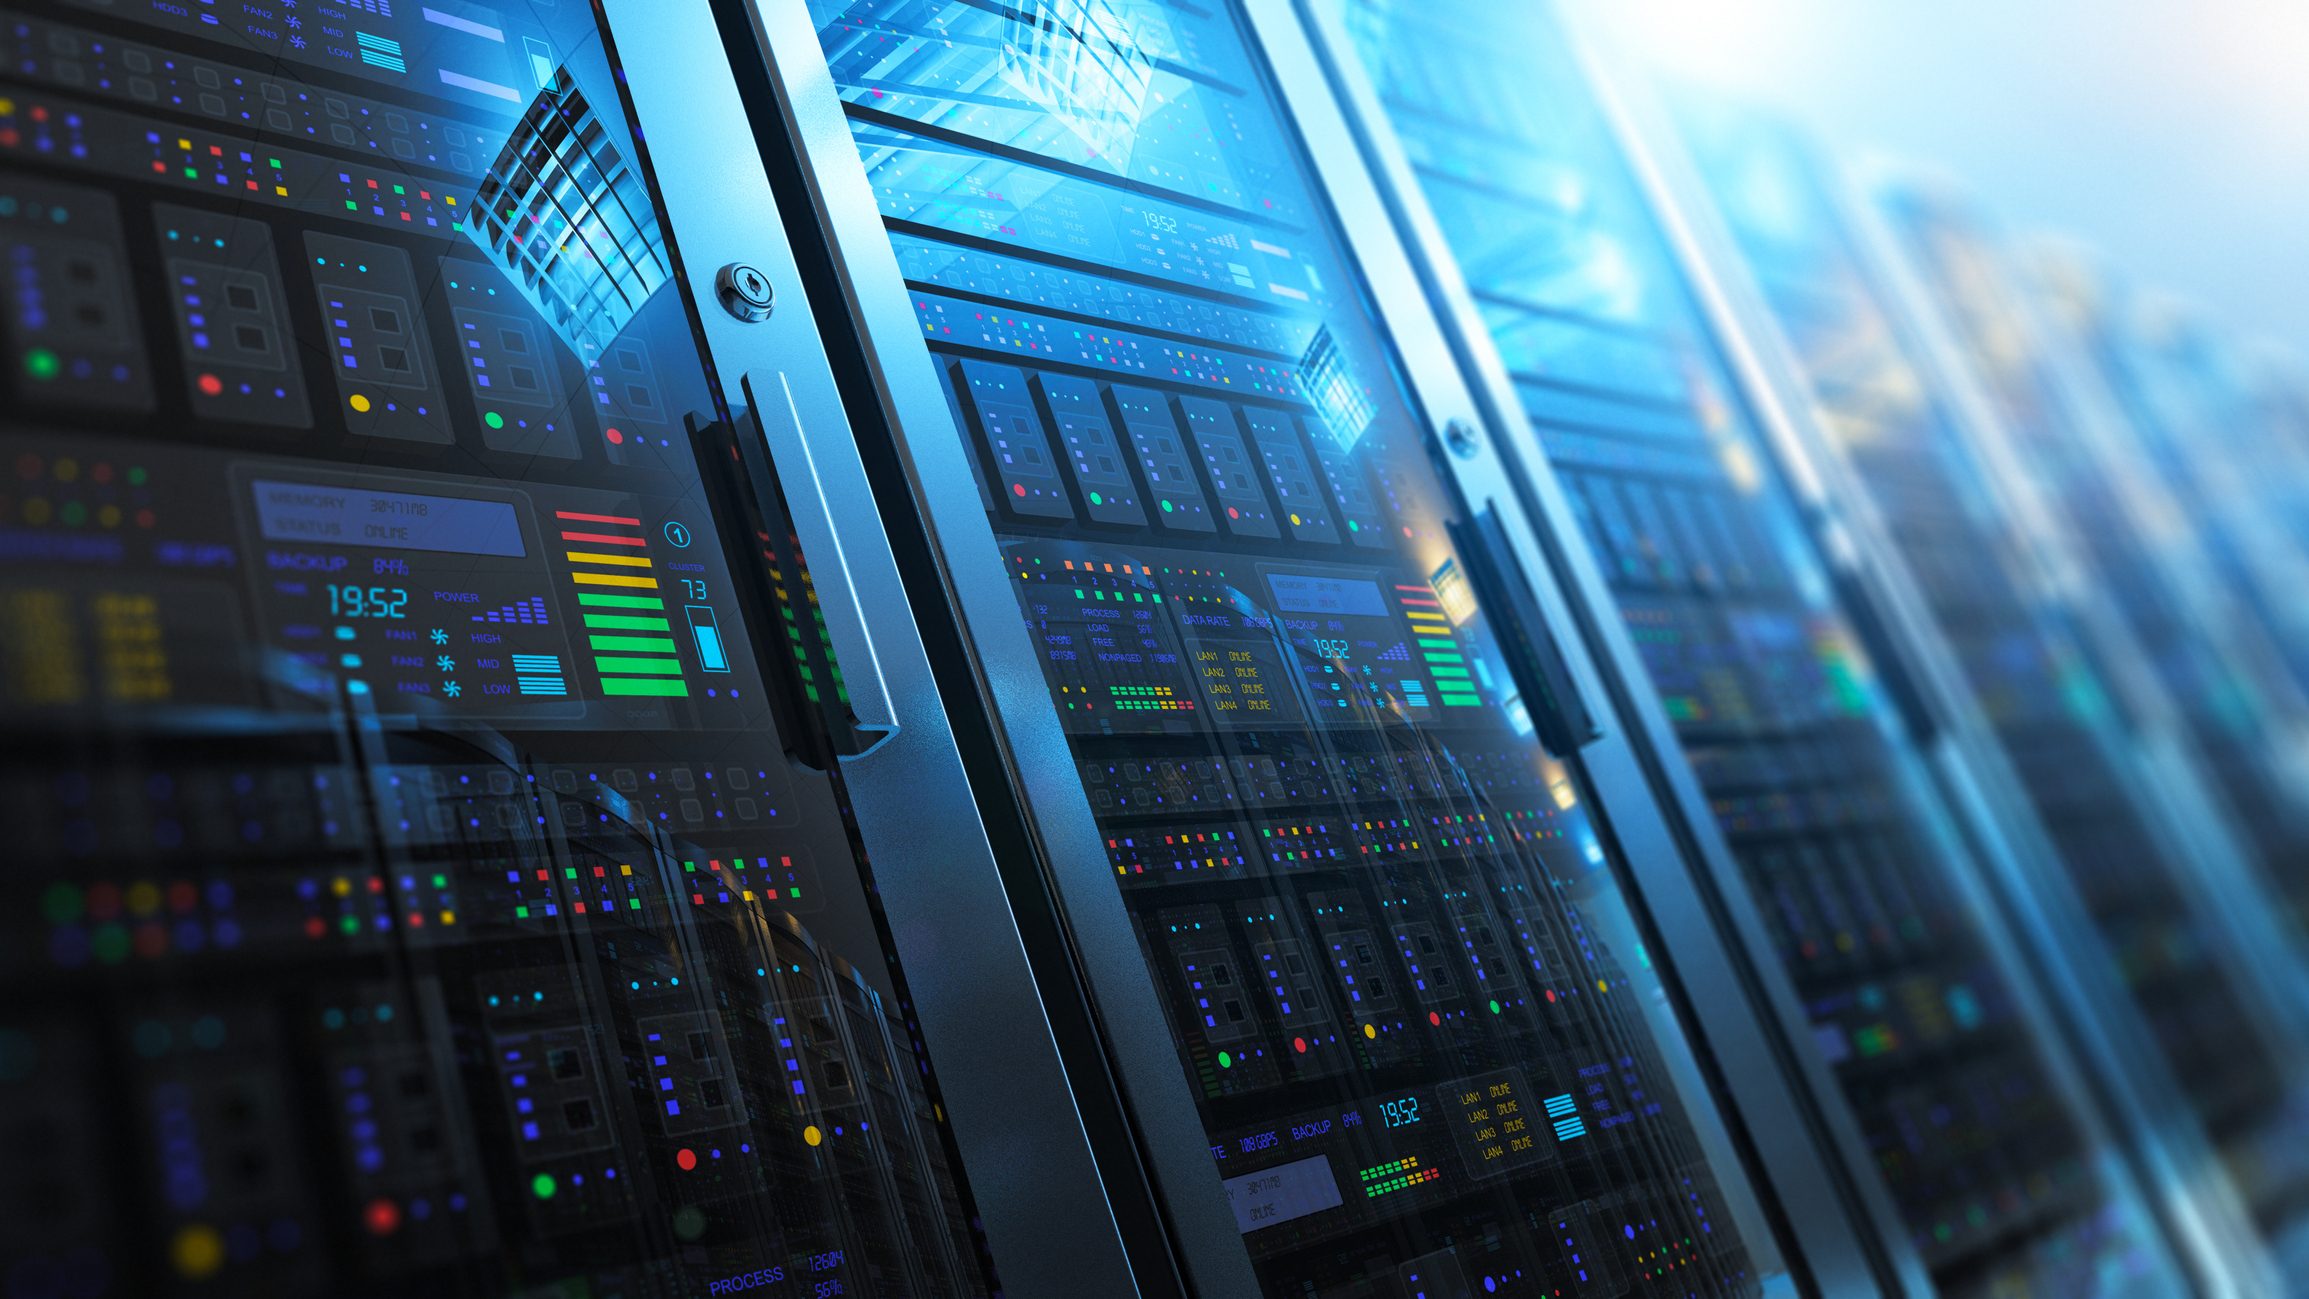 Enterprise Data Centers: What Role Do They Play and How Are They Evolving?